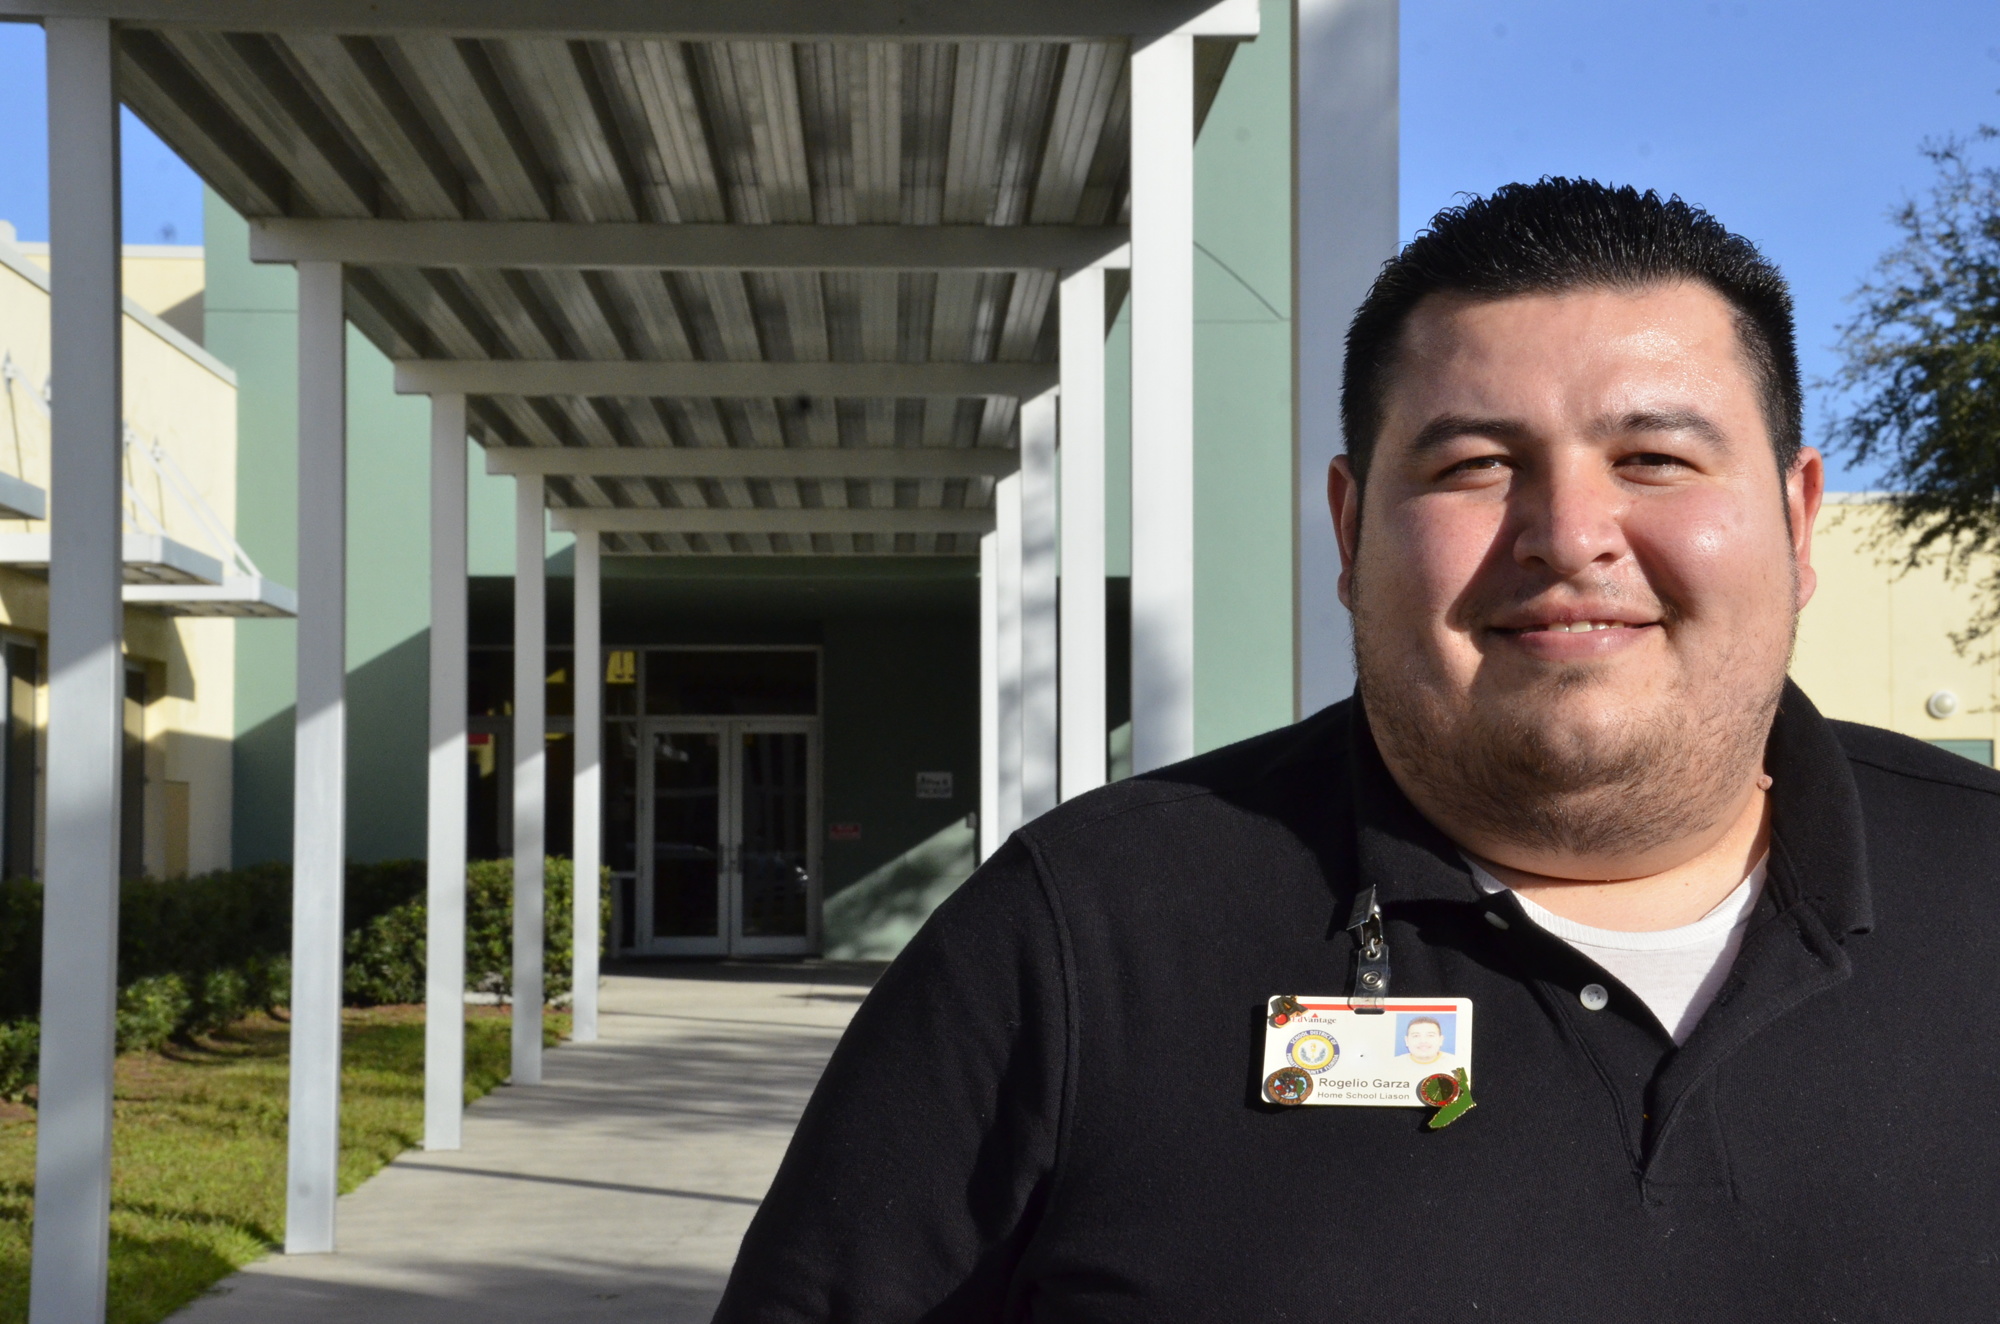 Roy Garza grew up as a migrant student and now is a home-school liaison between the Gilbert W. McNeal Elementary and the families of migrant students.